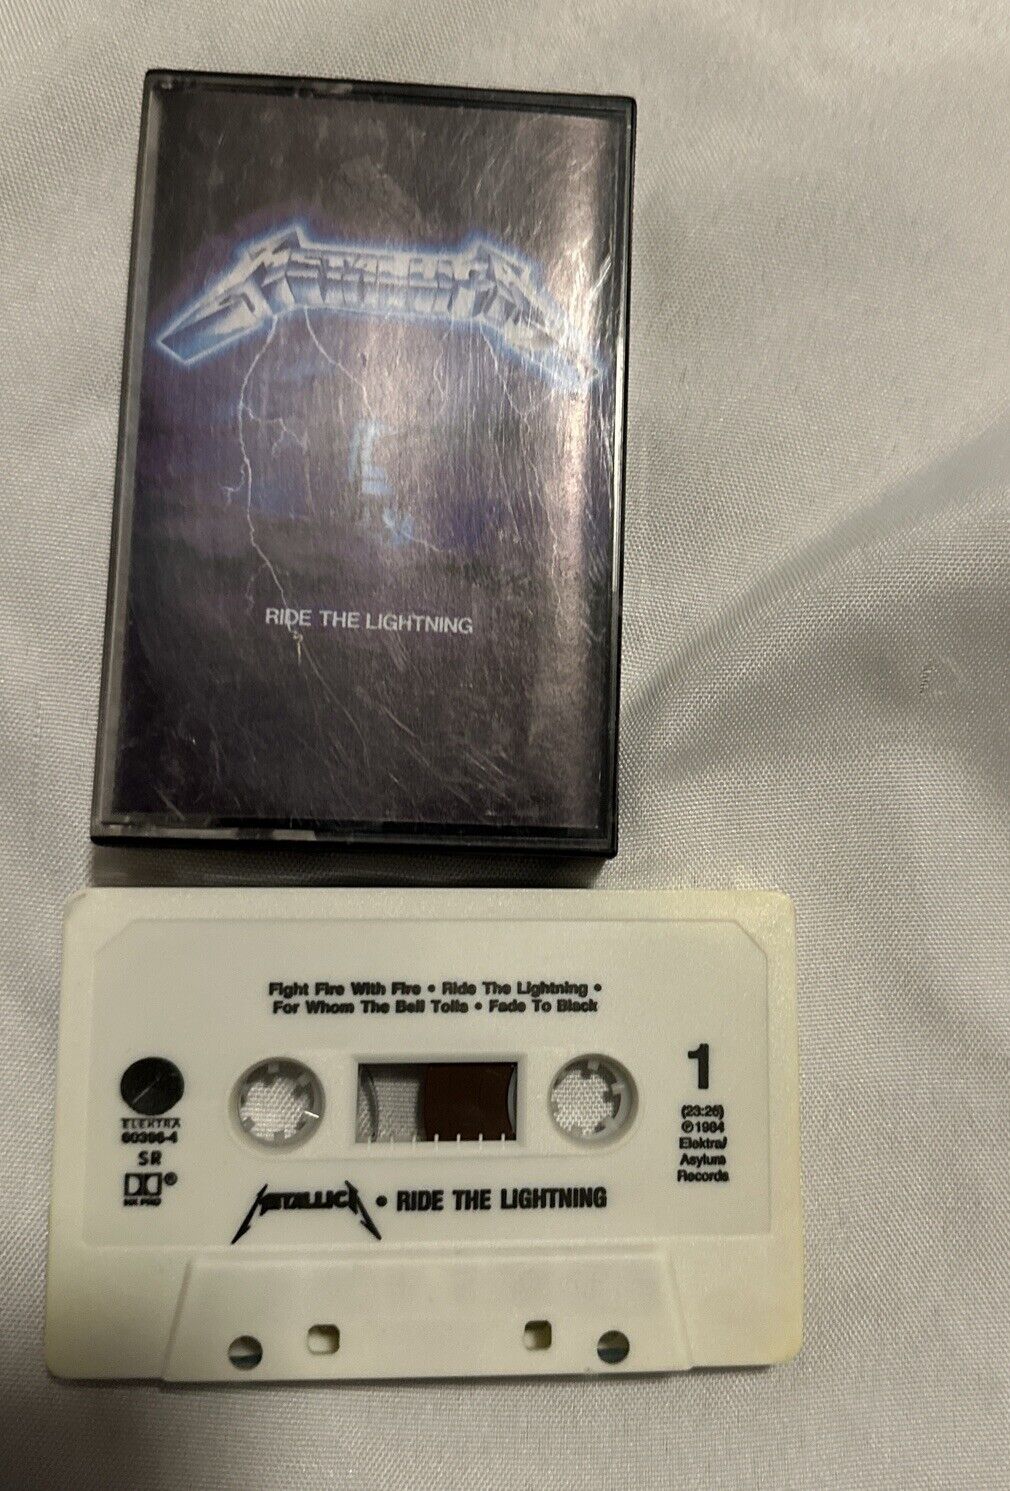 Metallica - Ride The Lightning Cassette Tape 1984 Clean Tested